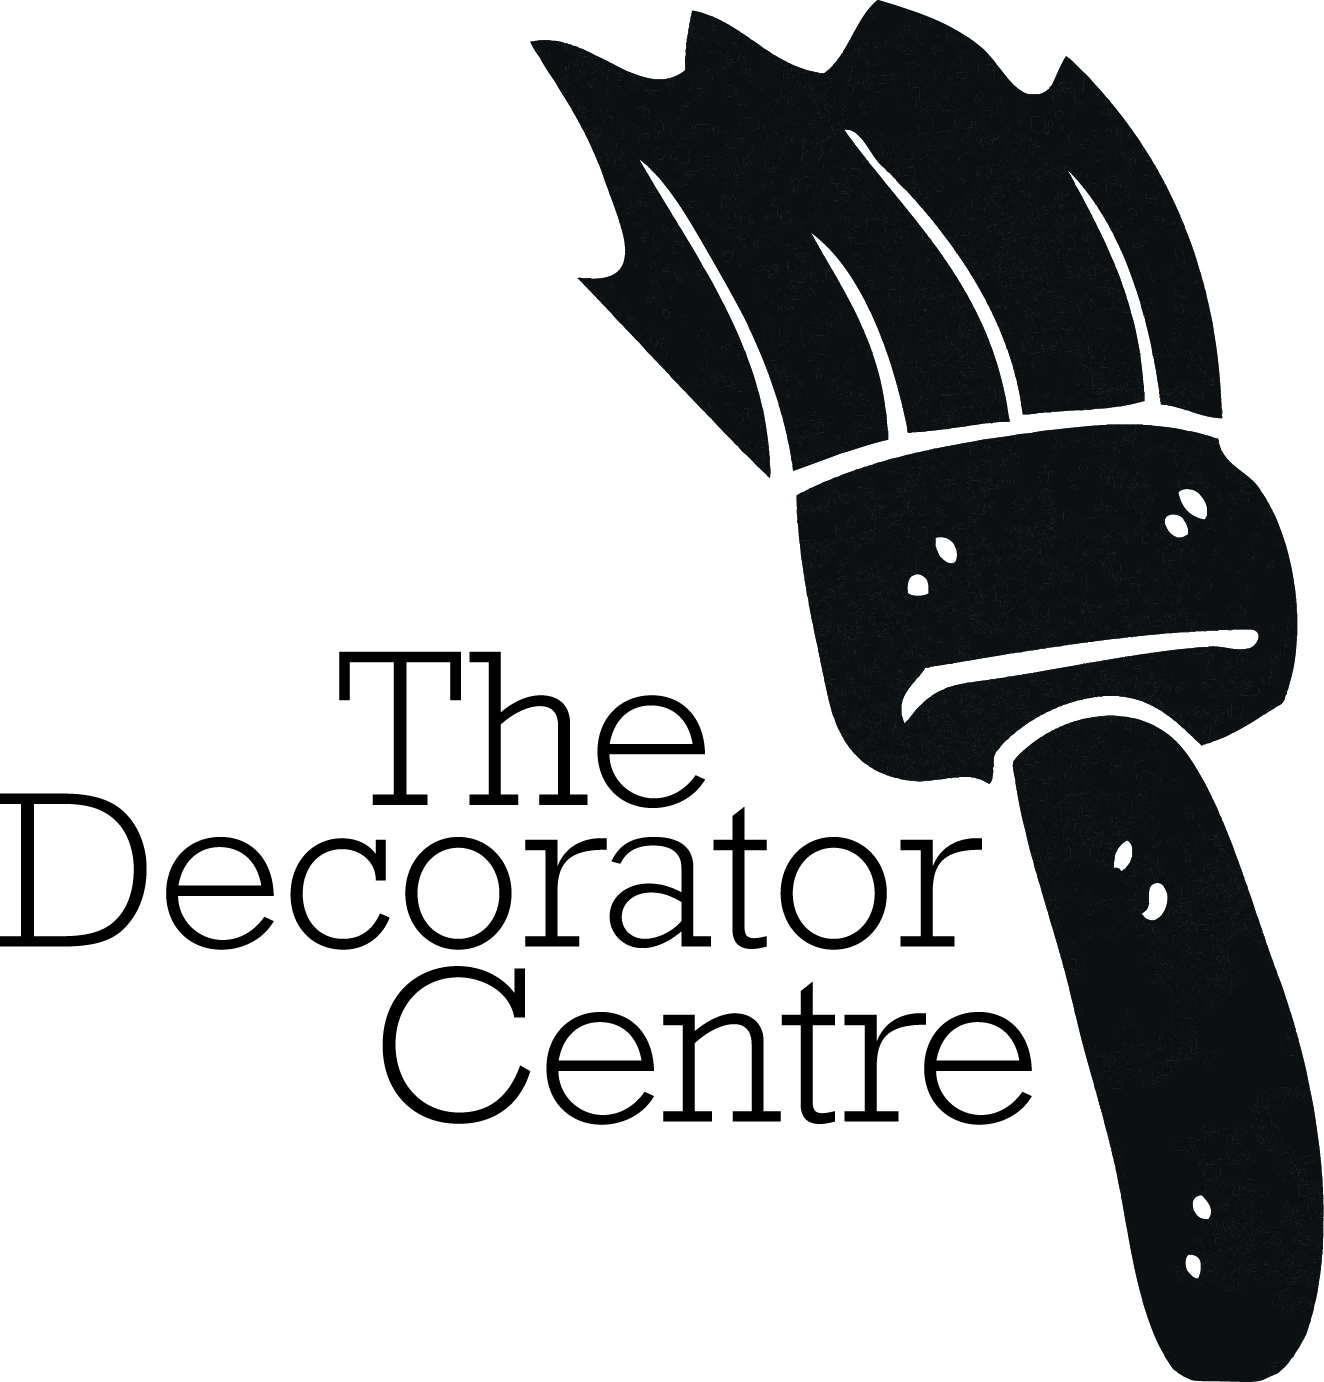 Welcome To Our New Member The Decorator Centre